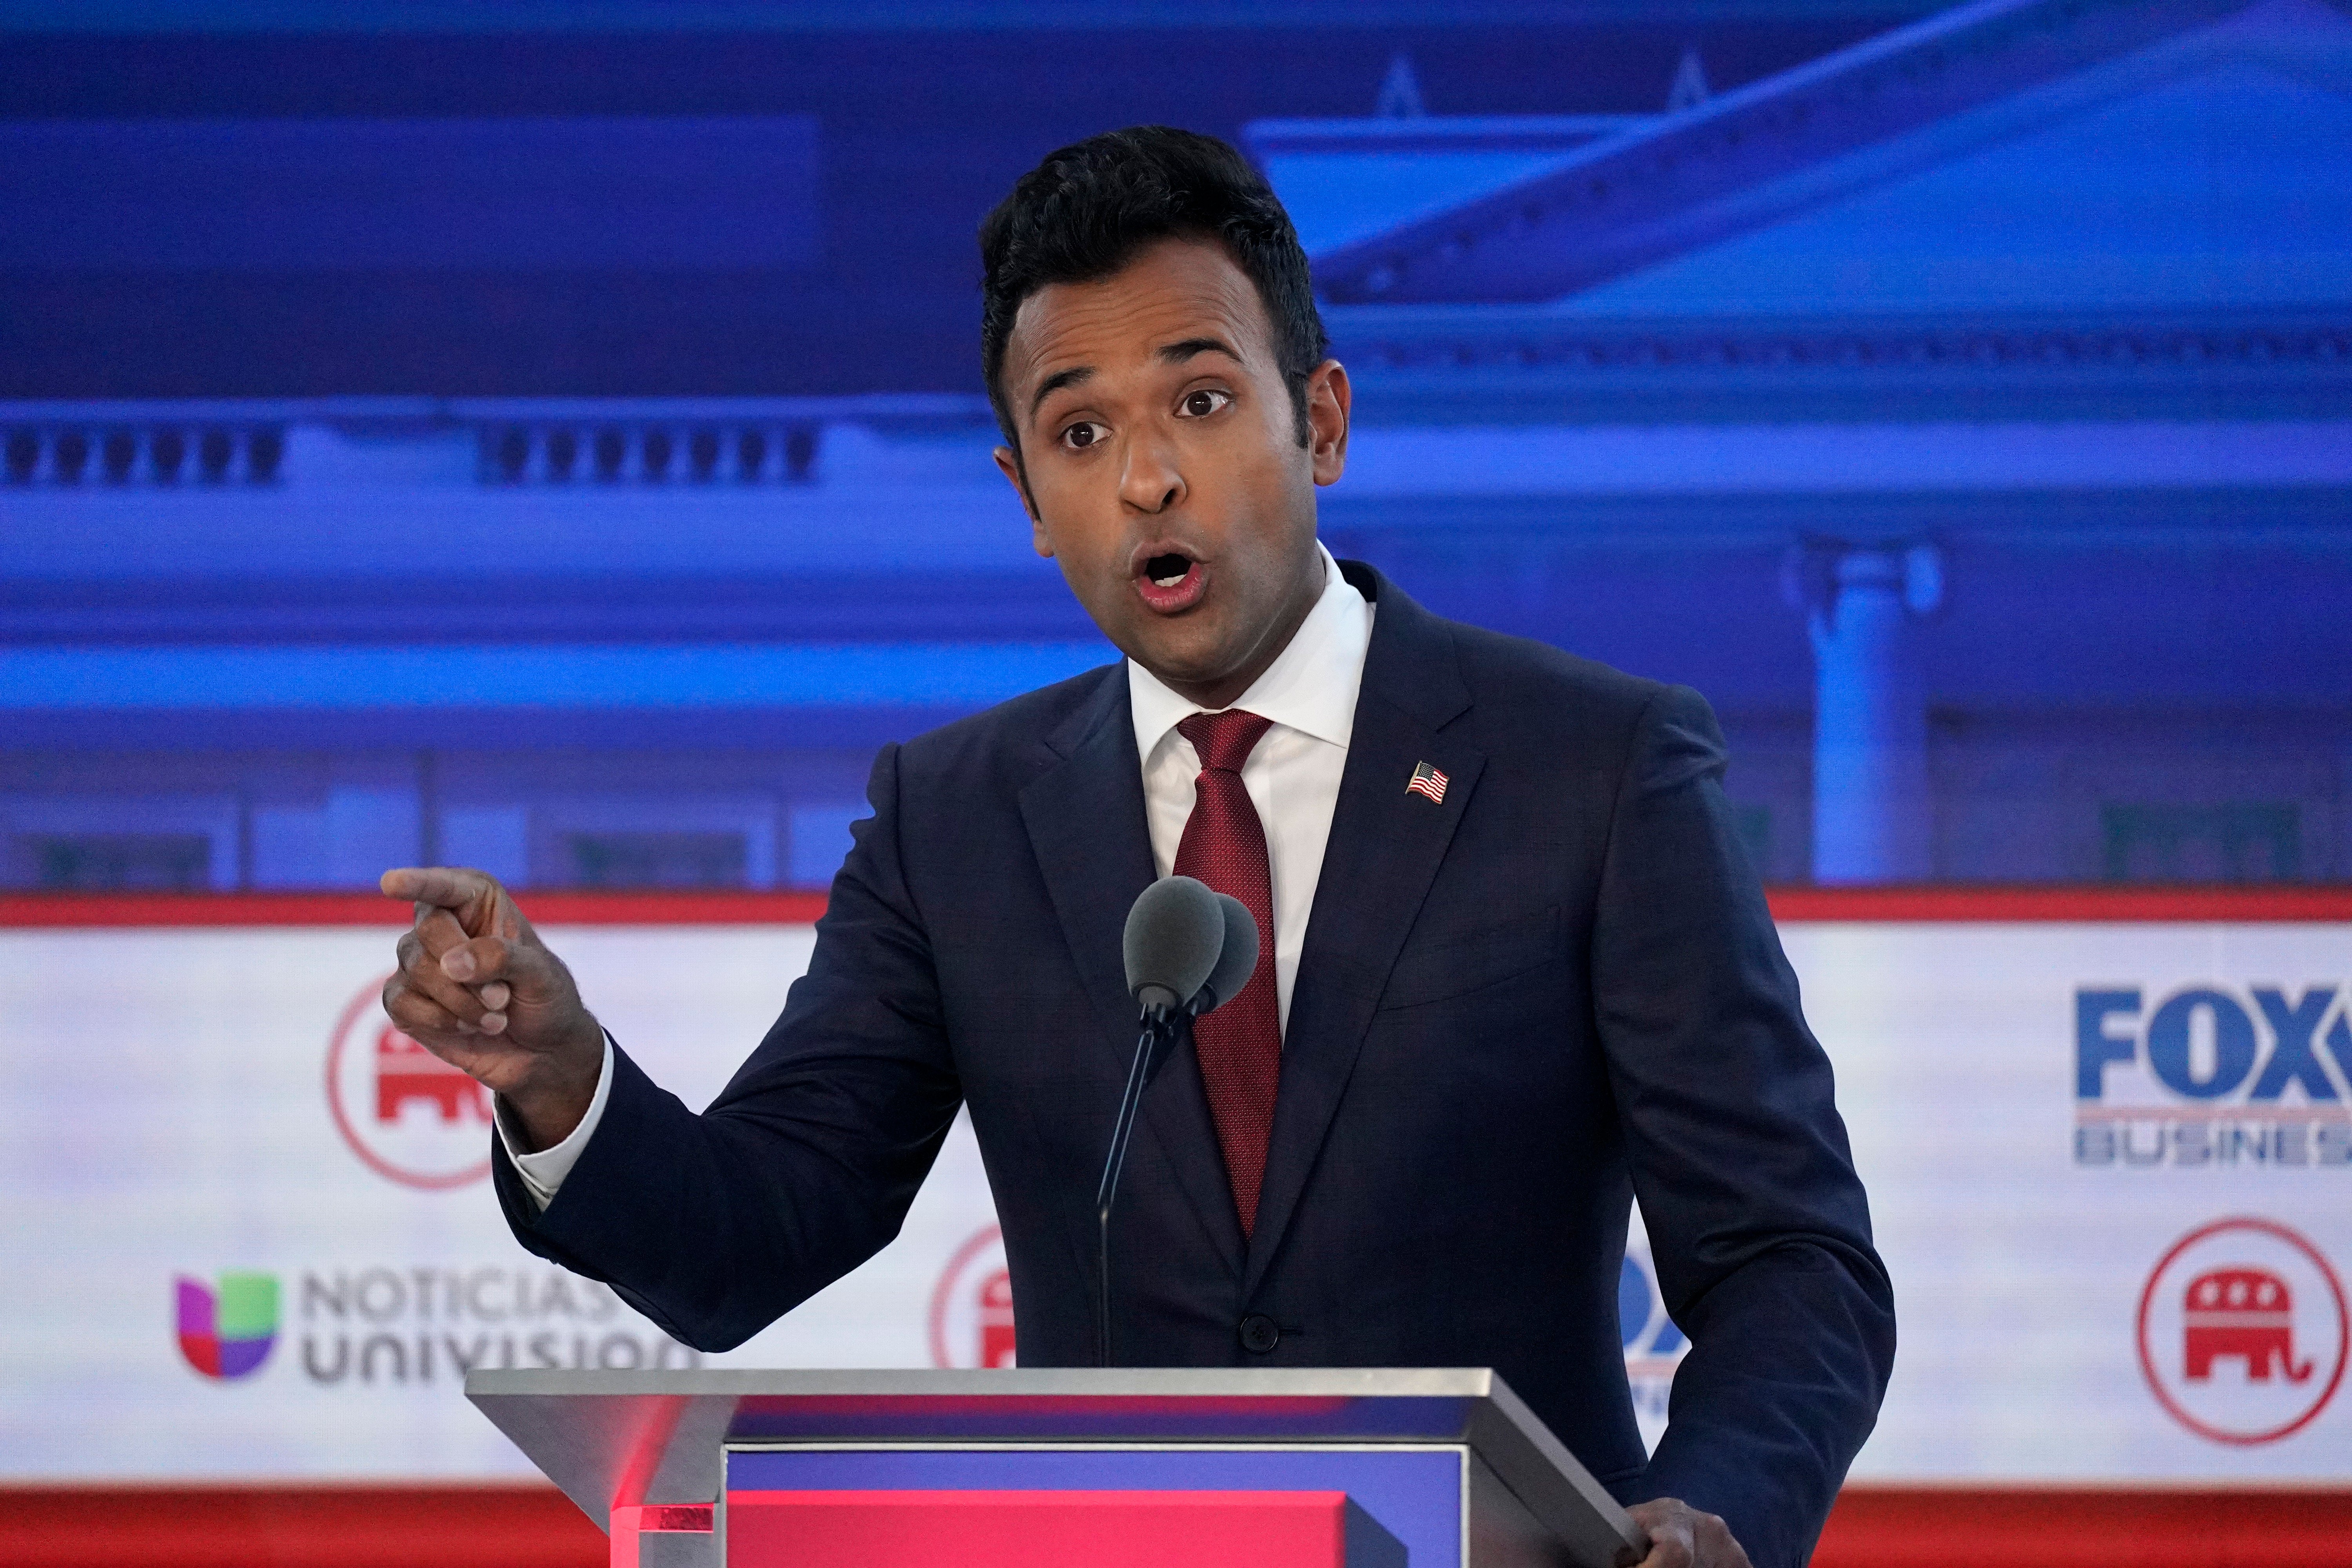 Businessman Vivek Ramaswamy speaks during a Republican presidential primary debate hosted by FOX Business Network and Univision, Wednesday, Sept. 27, 2023, at the Ronald Reagan Presidential Library in Simi Valley, Calif.